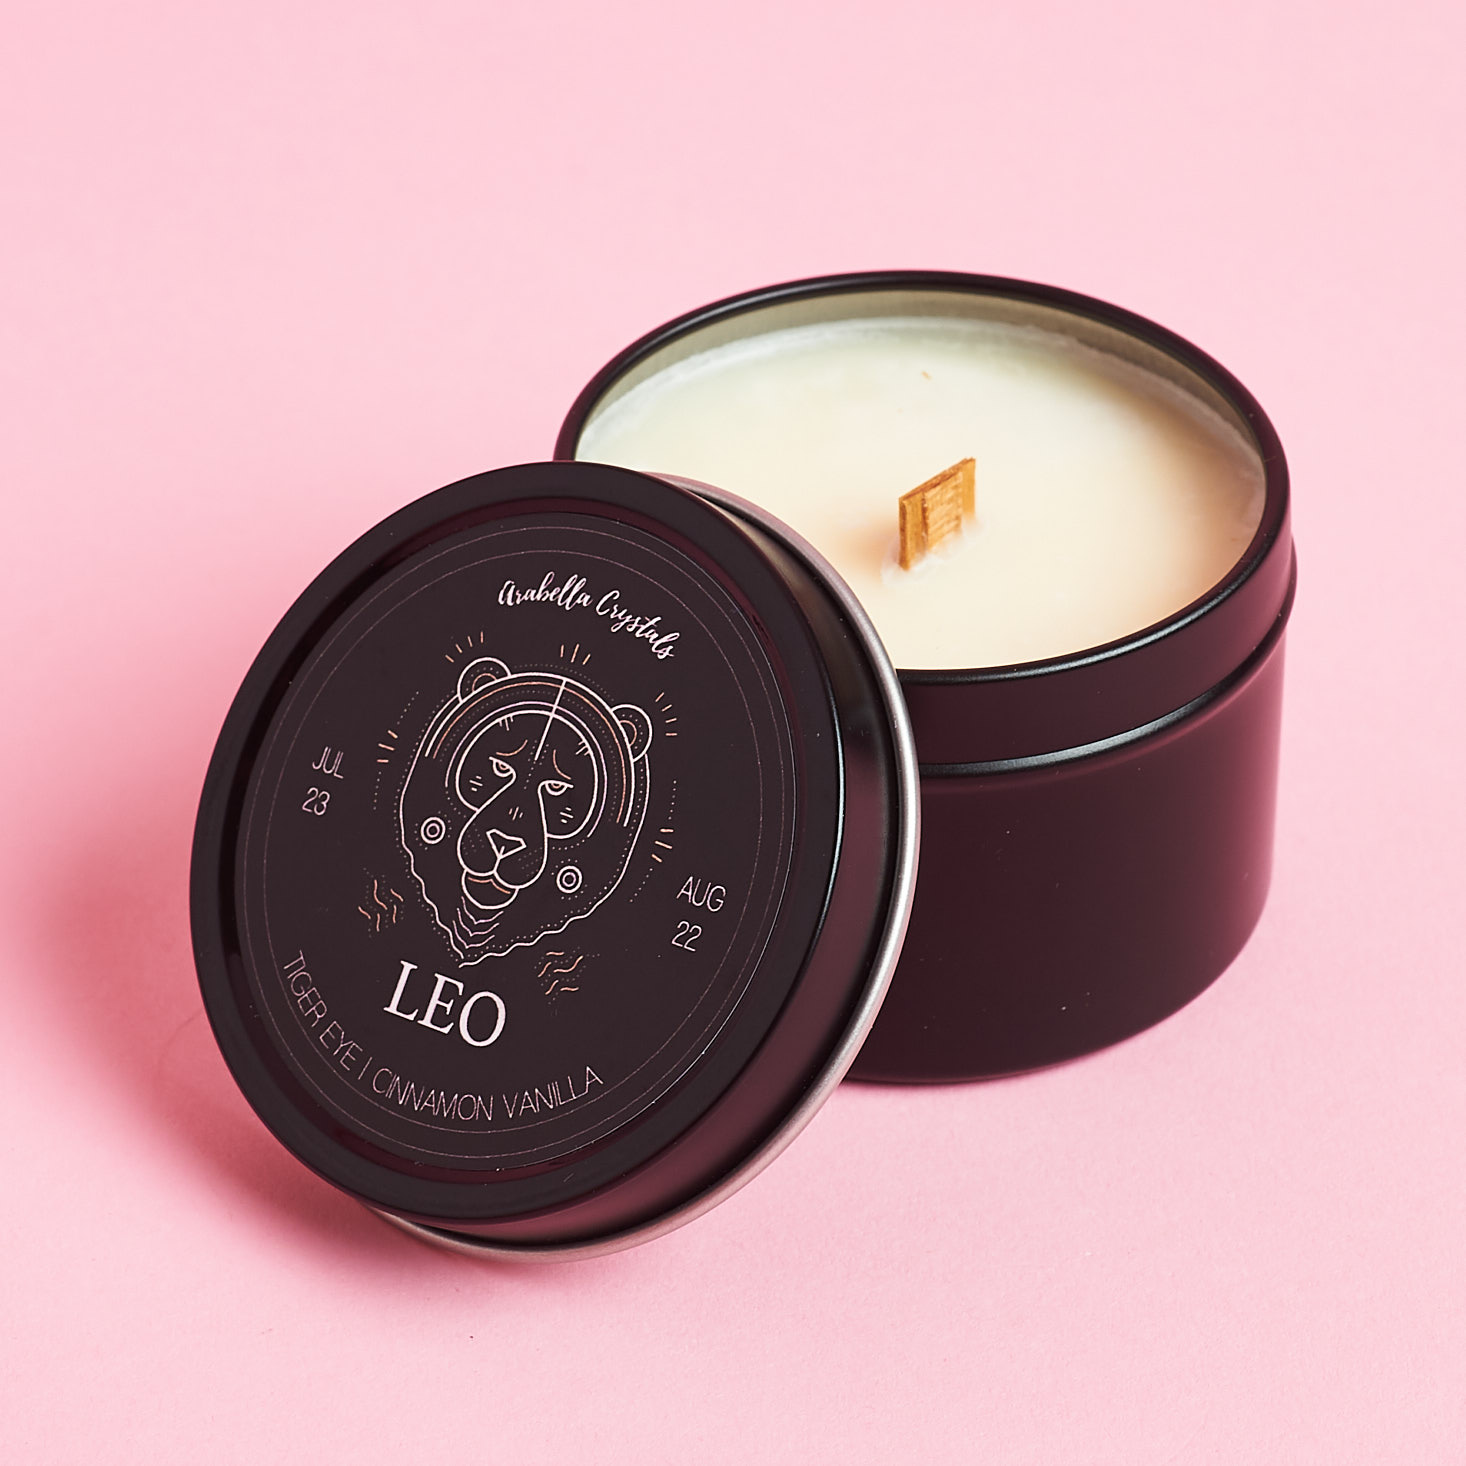 Zodiac Quarterly Leo Spring May 2019 review leo candle open